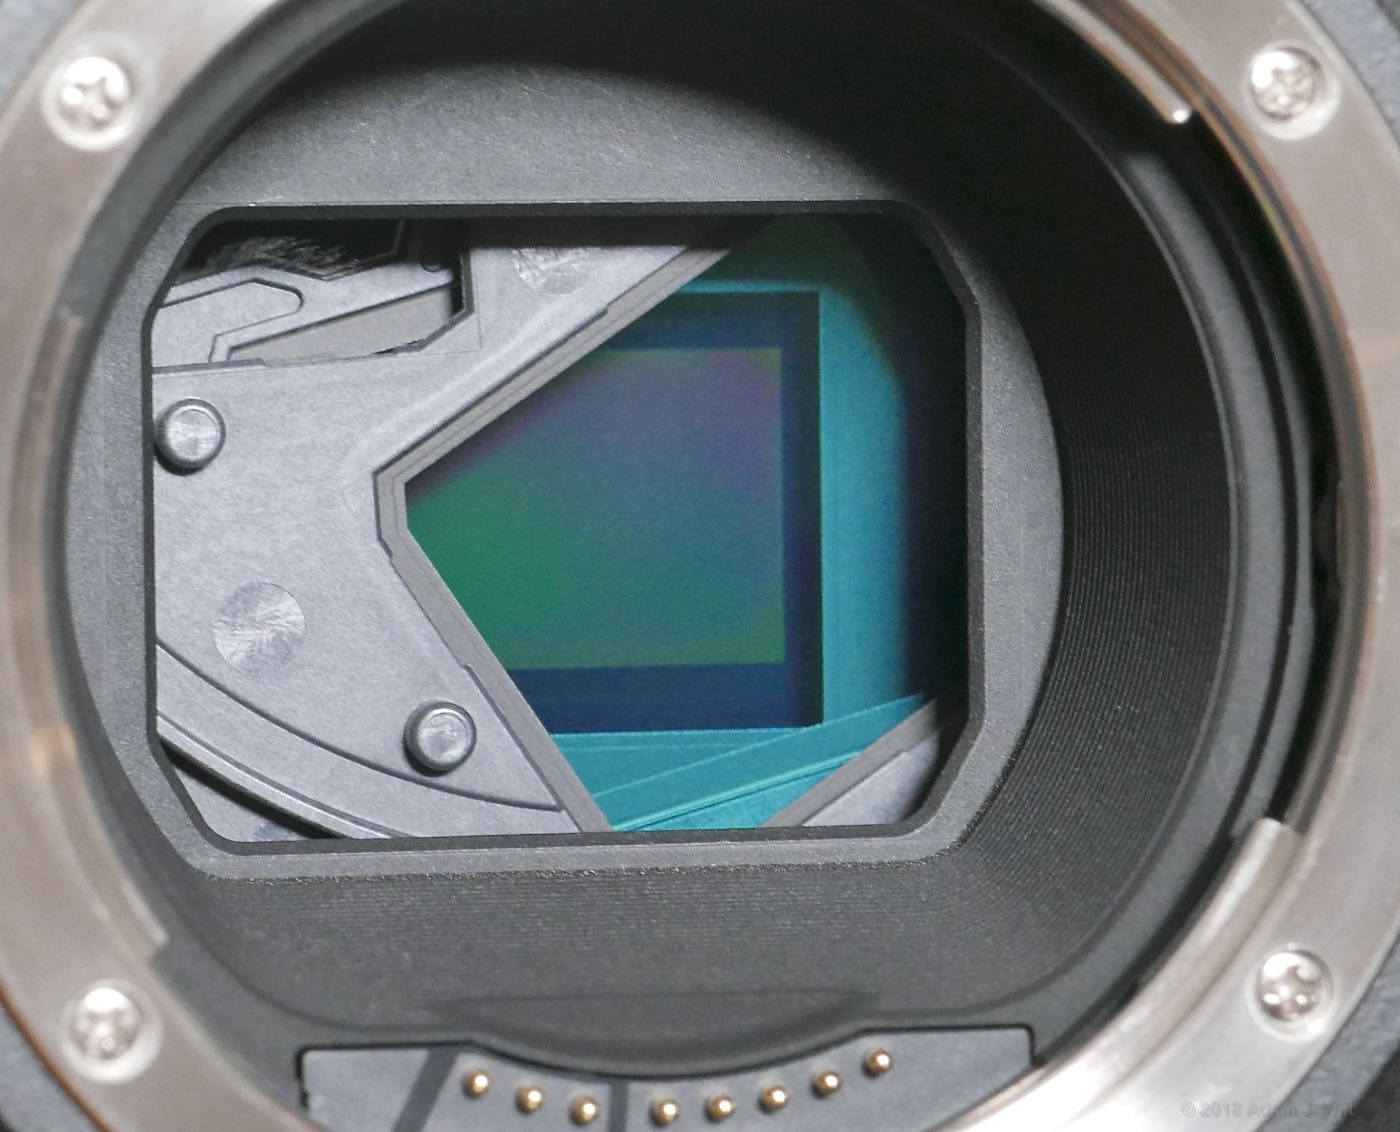 ND filters in the EVA1, partially retracted.